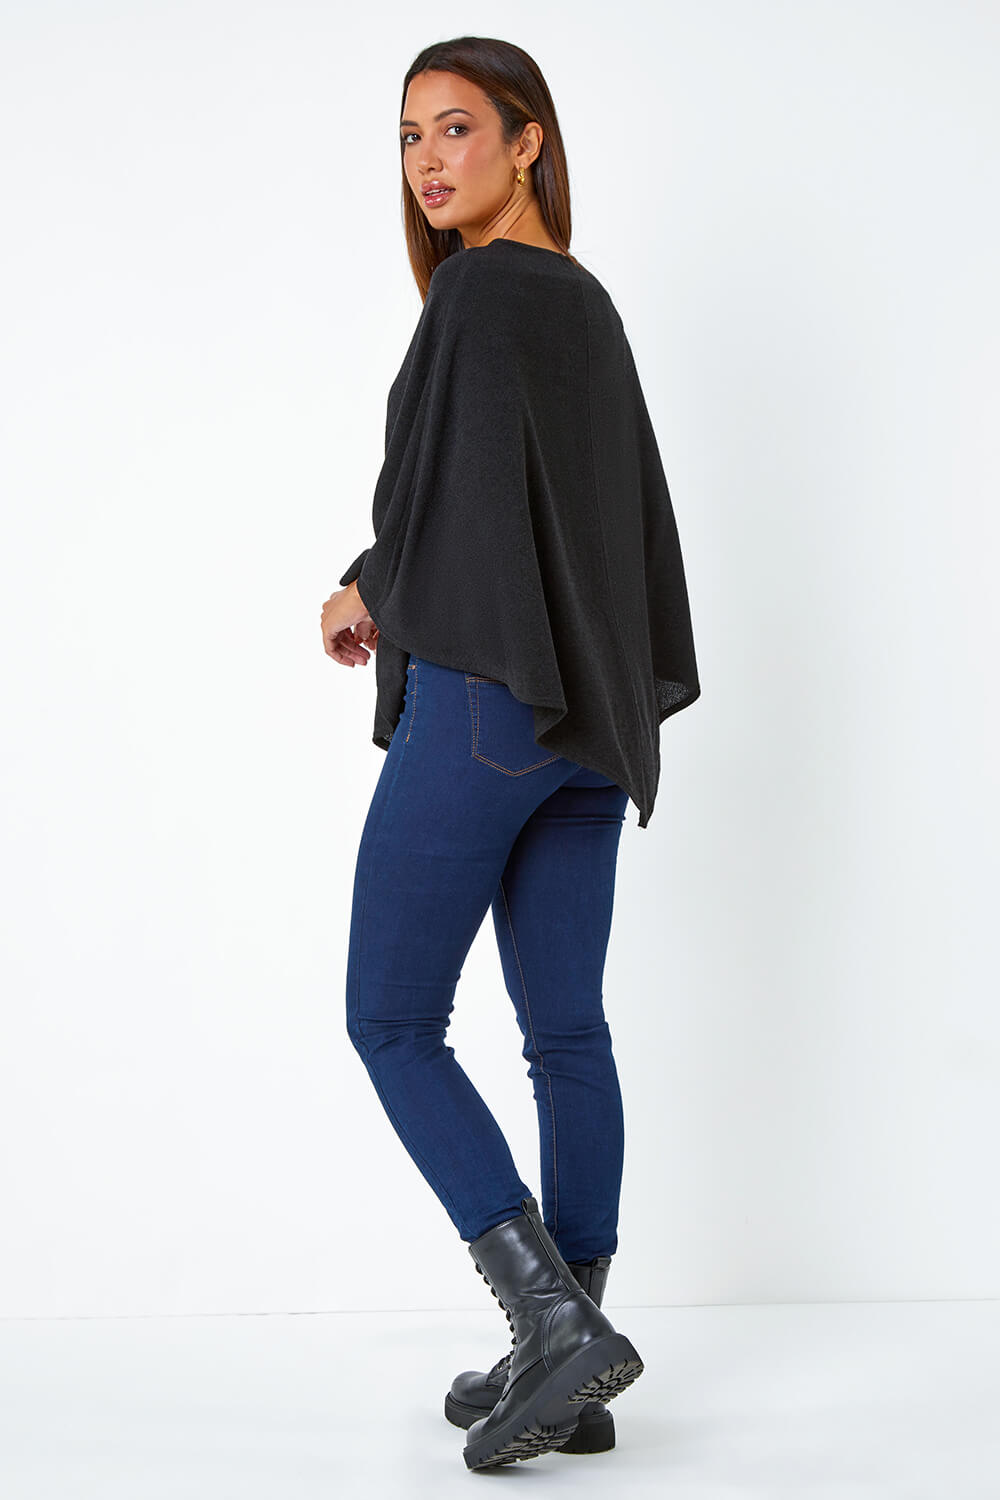 Black Marl Overlay Stretch Top, Image 3 of 5